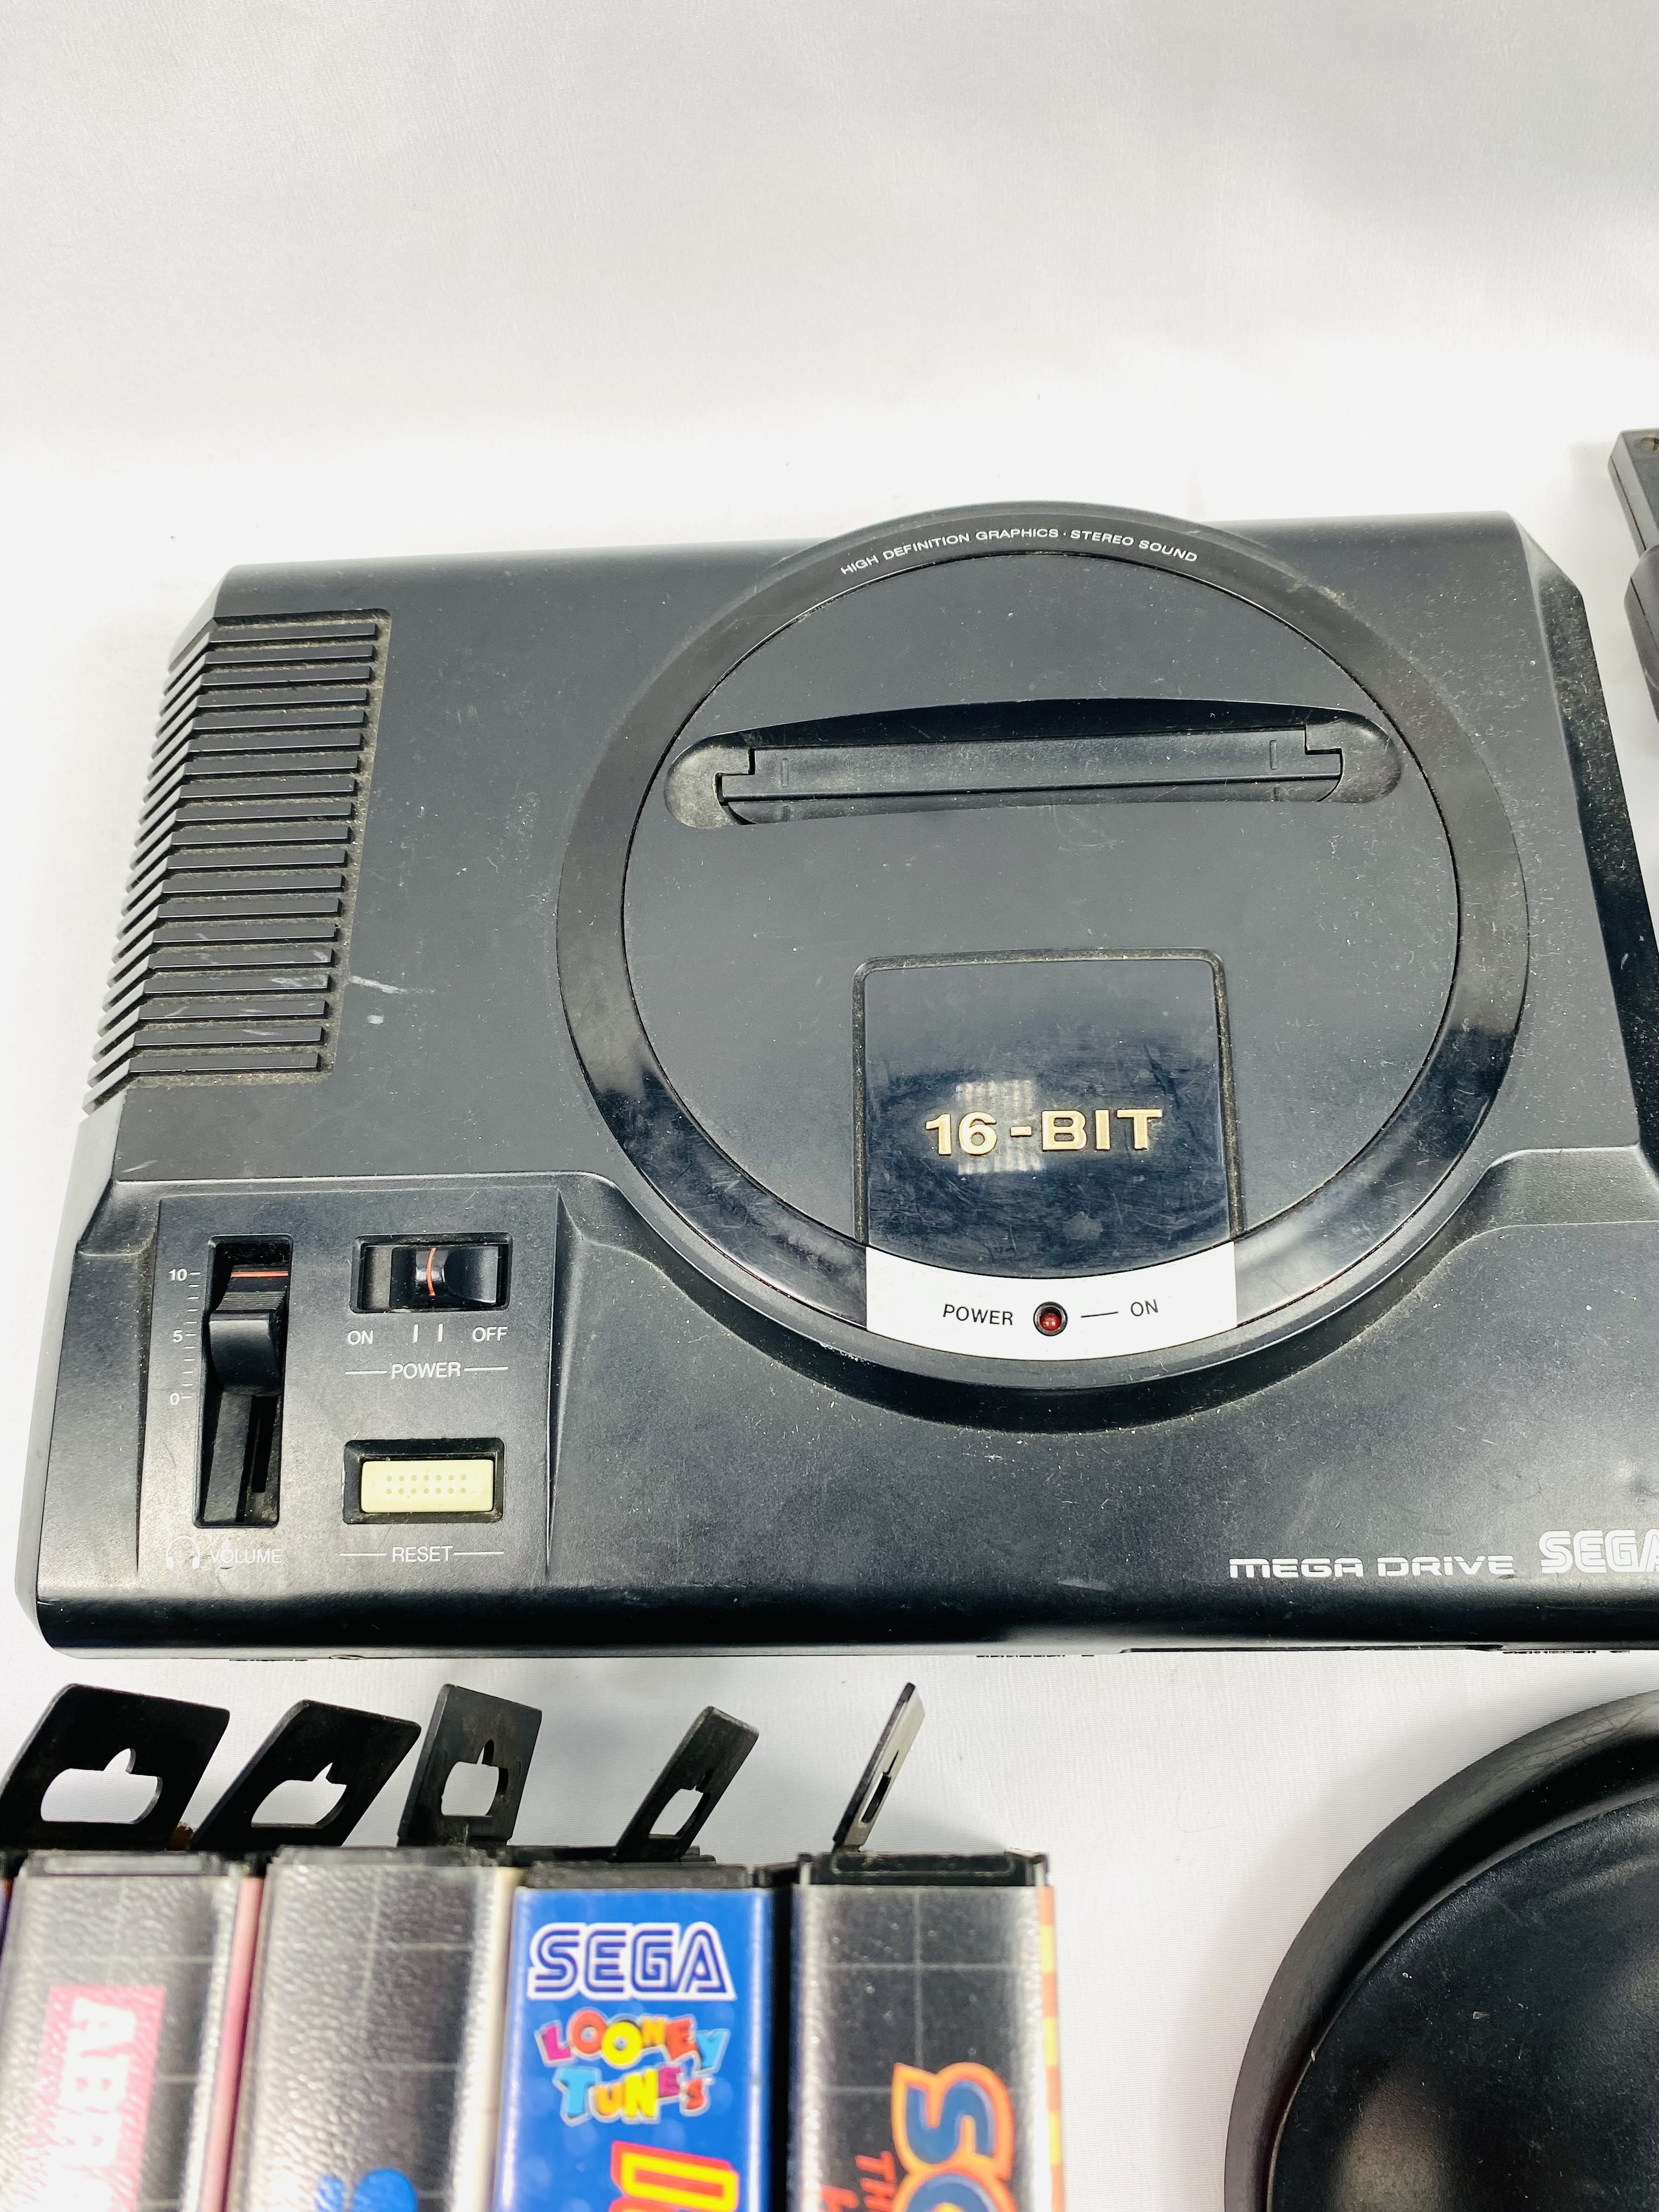 Sega Mega drive with games and accessories - Image 3 of 4